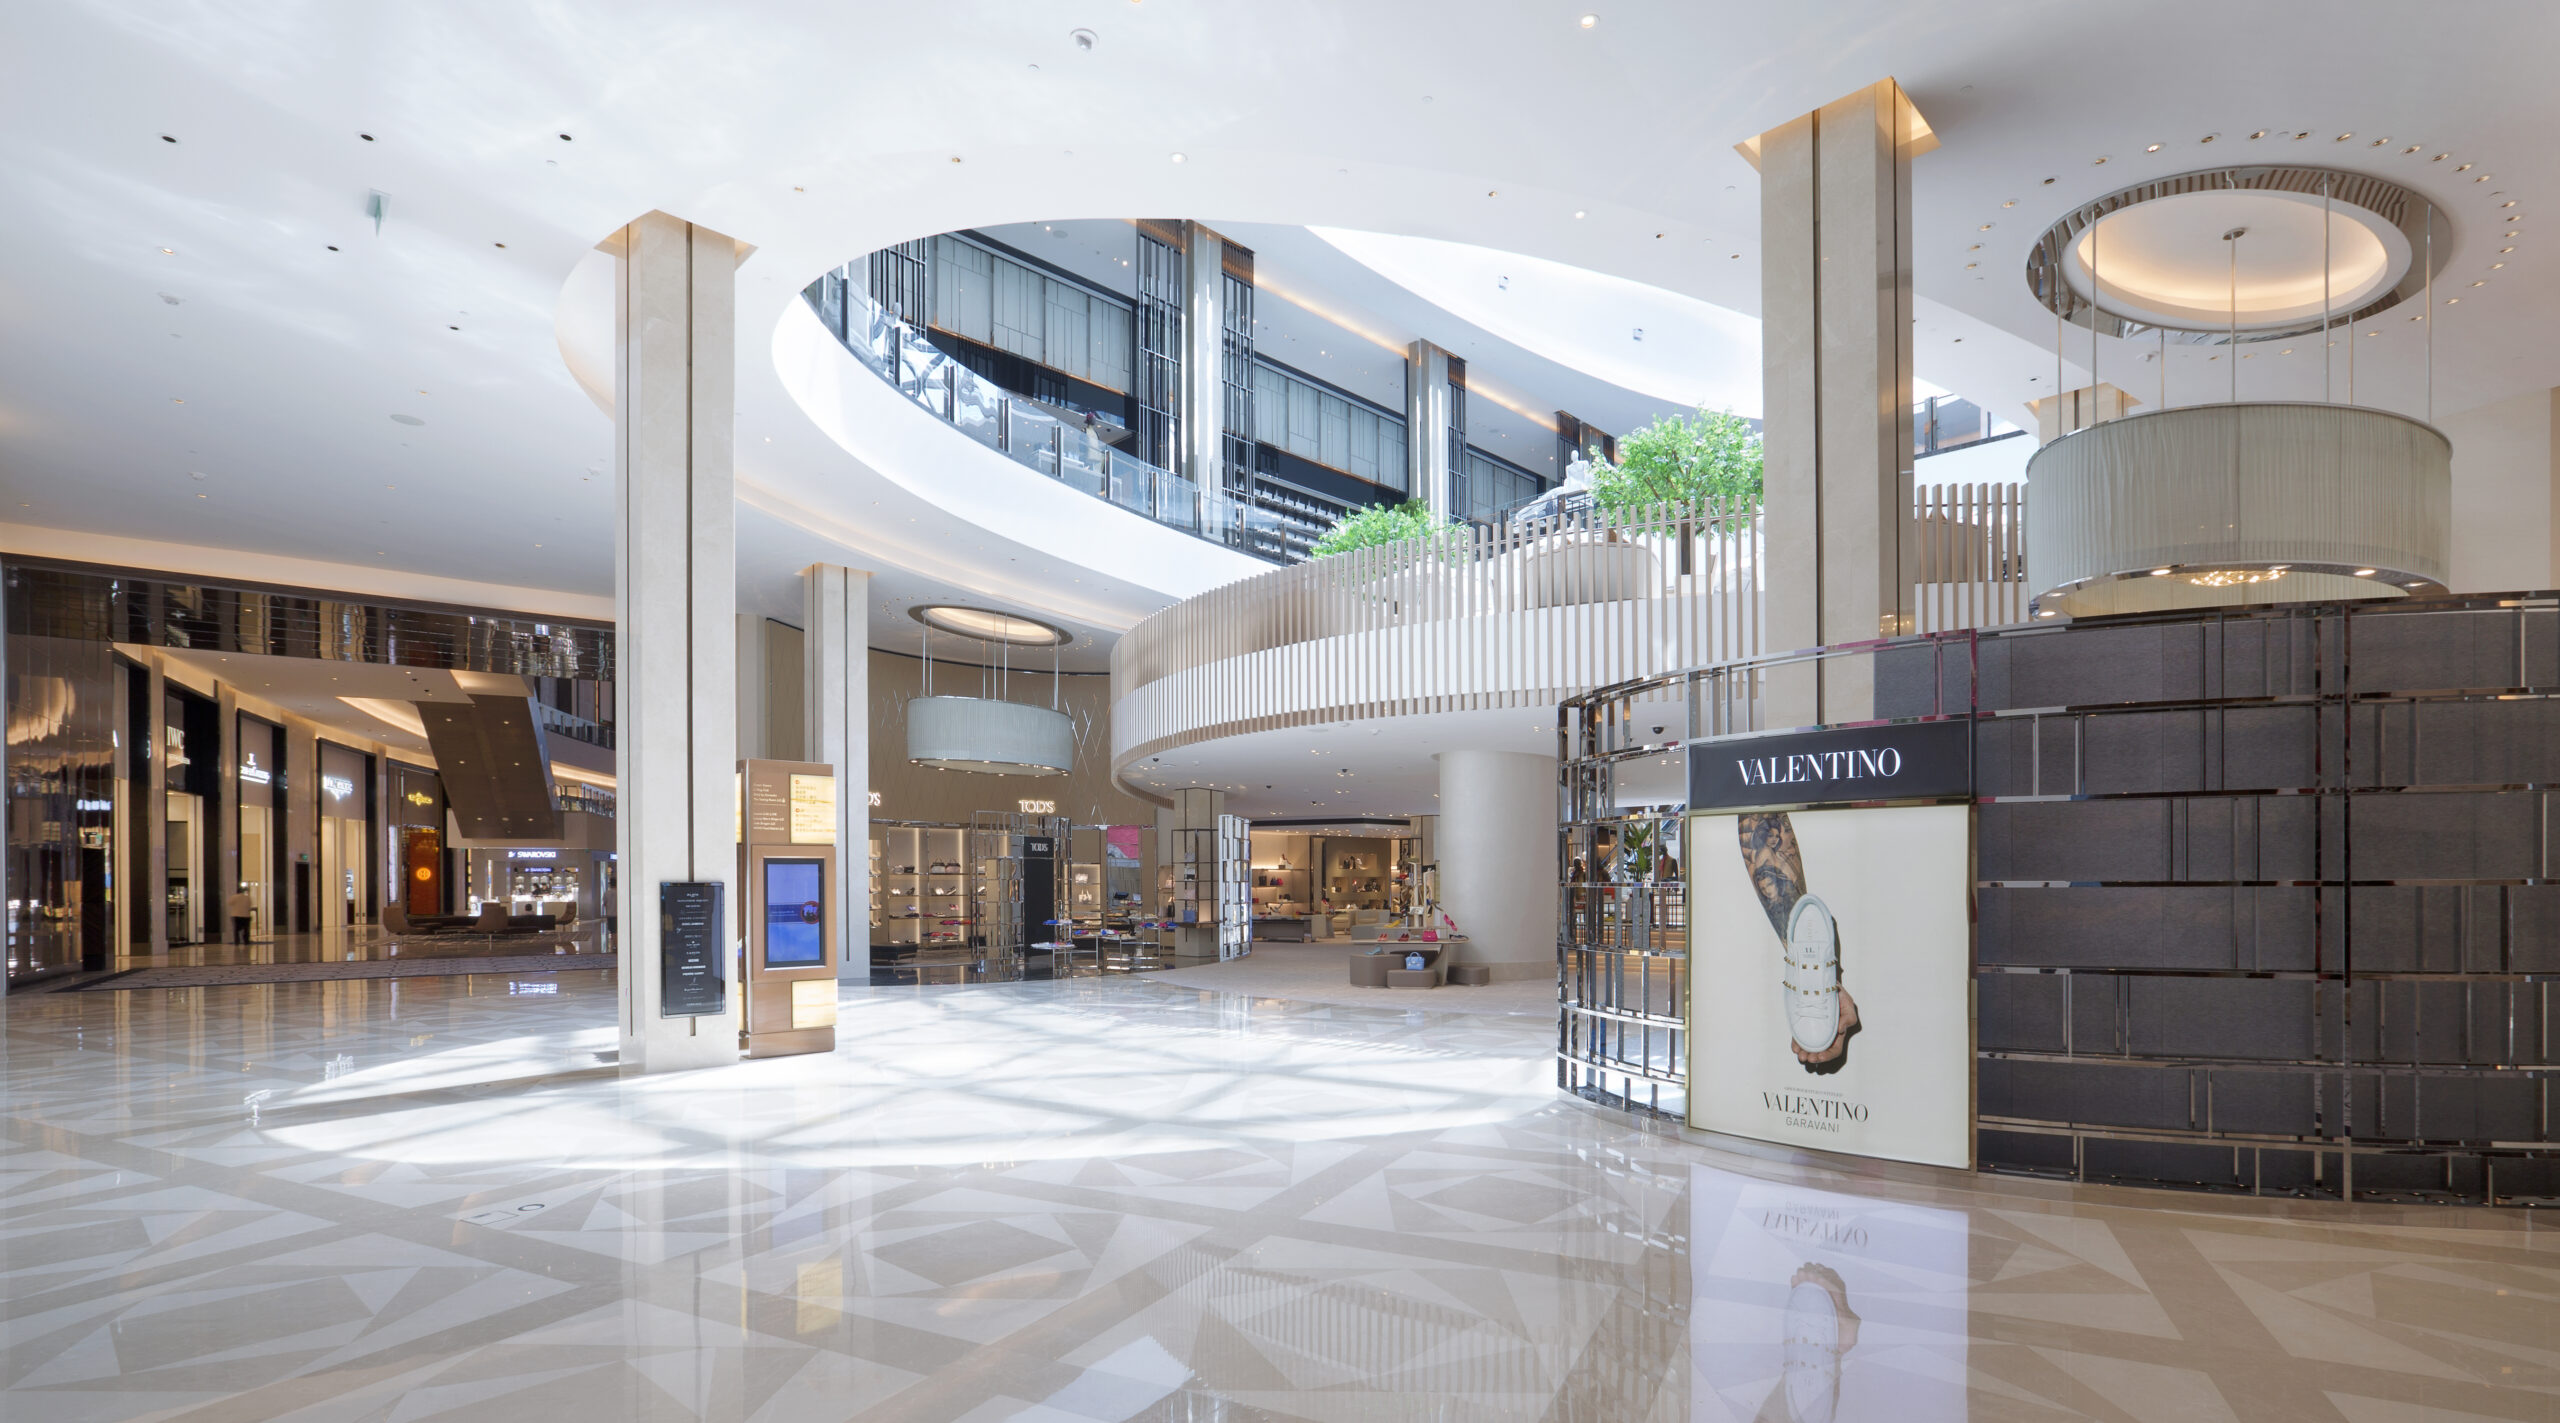 The new City of Dreams store is "a strategically designed, exclusive and eye-opening lifestyle luxury shopping experience in the heart of Macau," says DFS